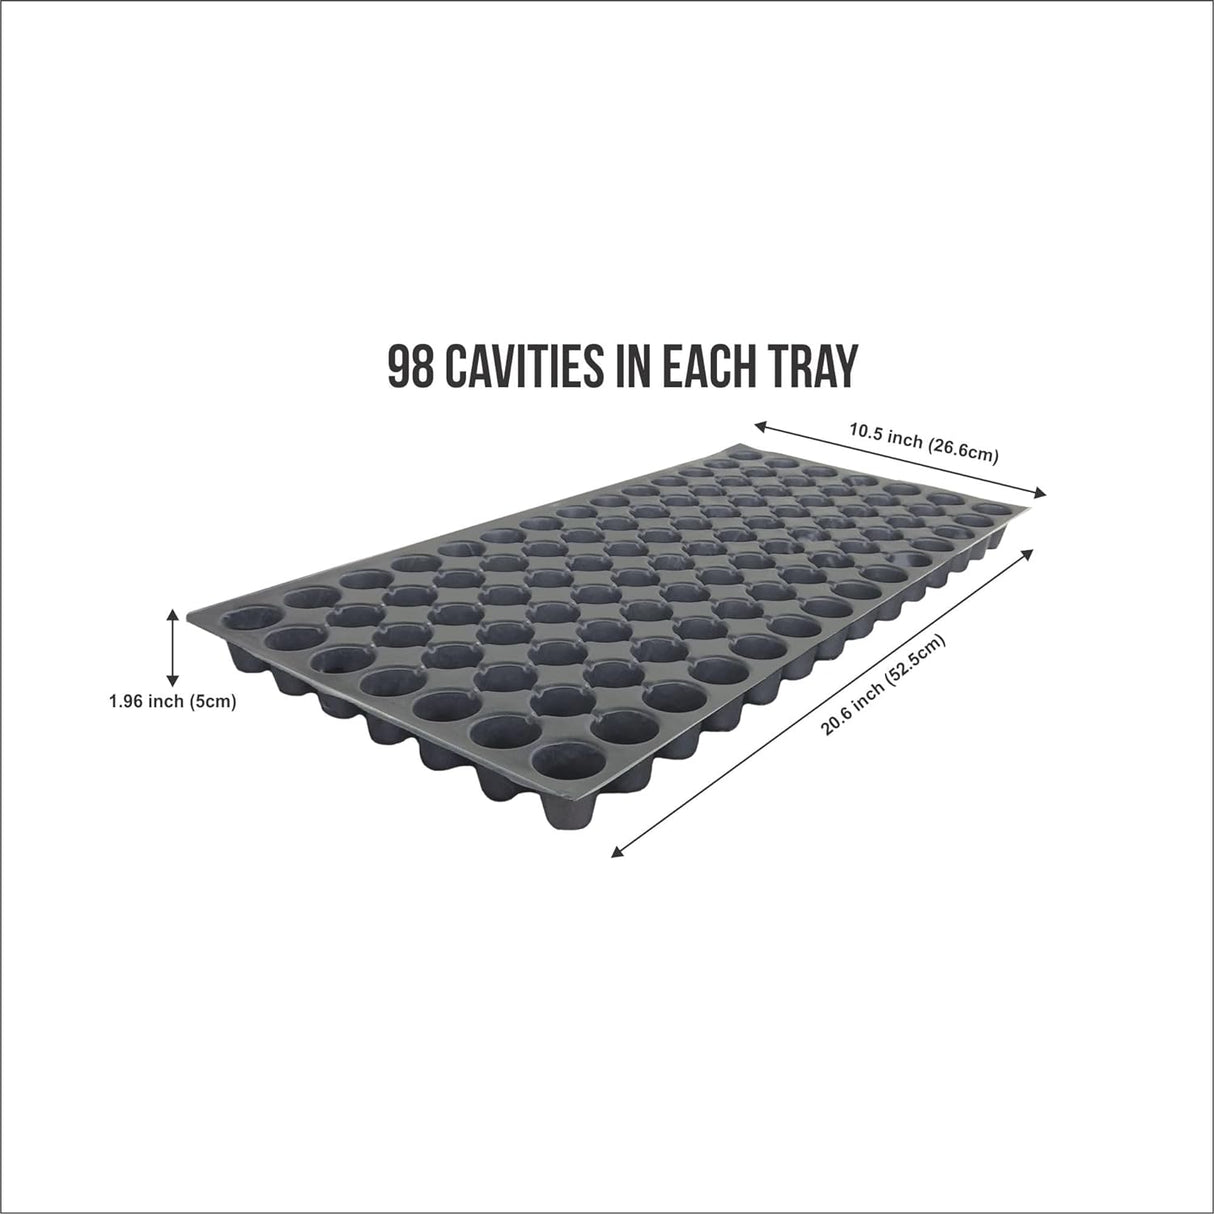 SINGHAL Seedling Tray - Pack of 10 (Black, 98 Holes) Germination Trays for Seedling, Nursery Trays for Plants, Reusable Plastic Trays for Garden Plantation, 98 Cavities Tray for Seeding